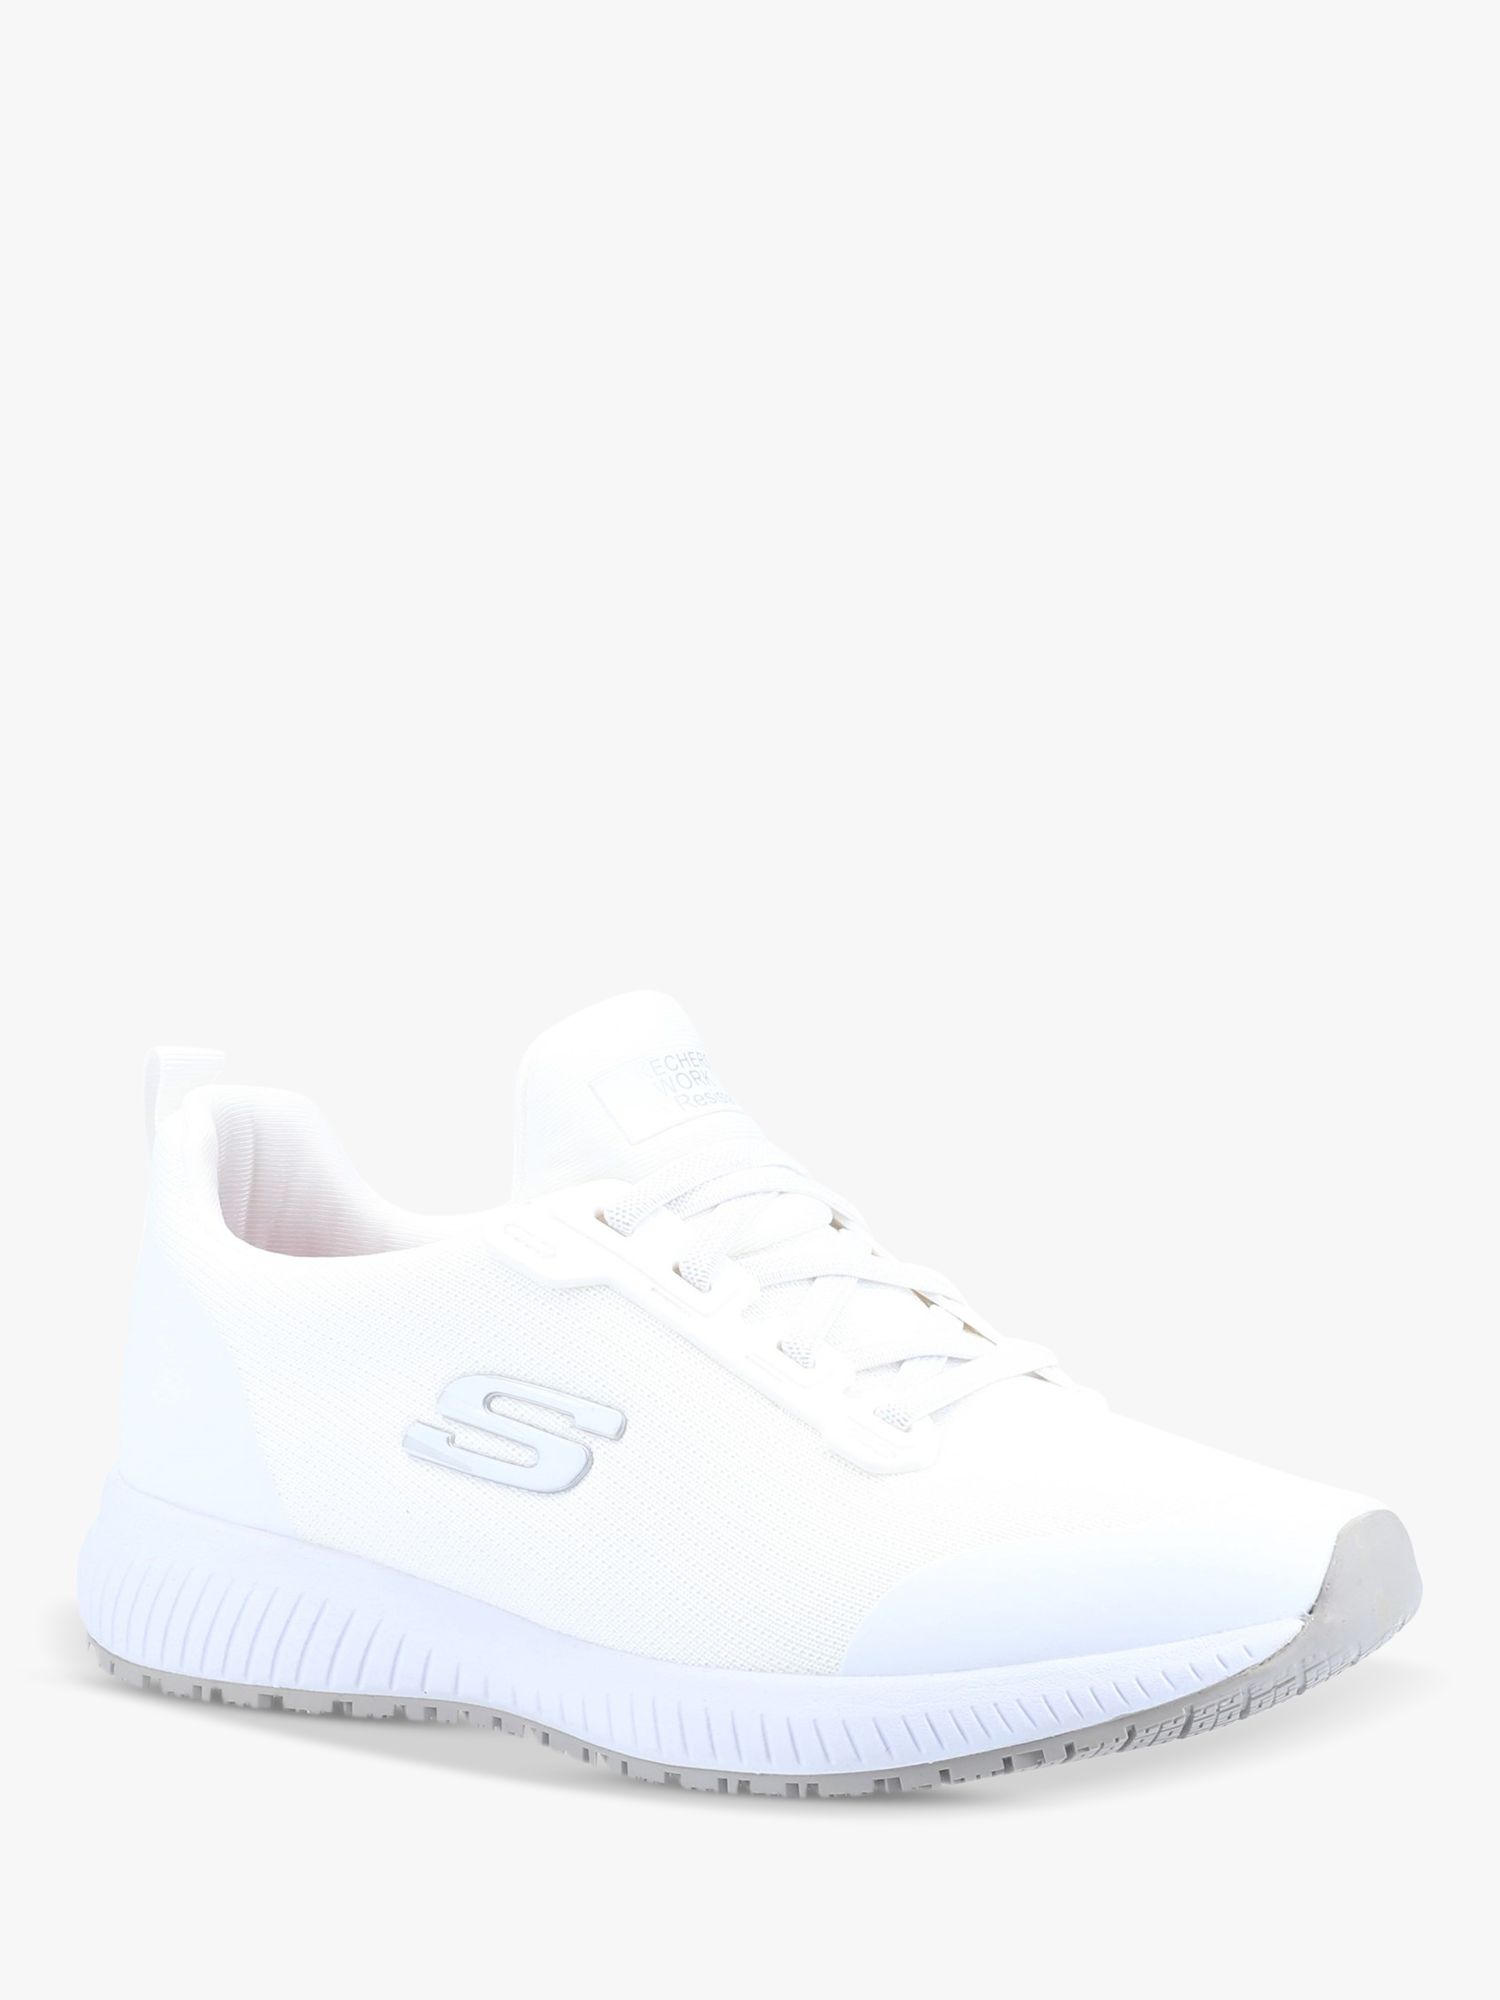 Squad SR Lace Up Trainers, White at John Lewis & Partners